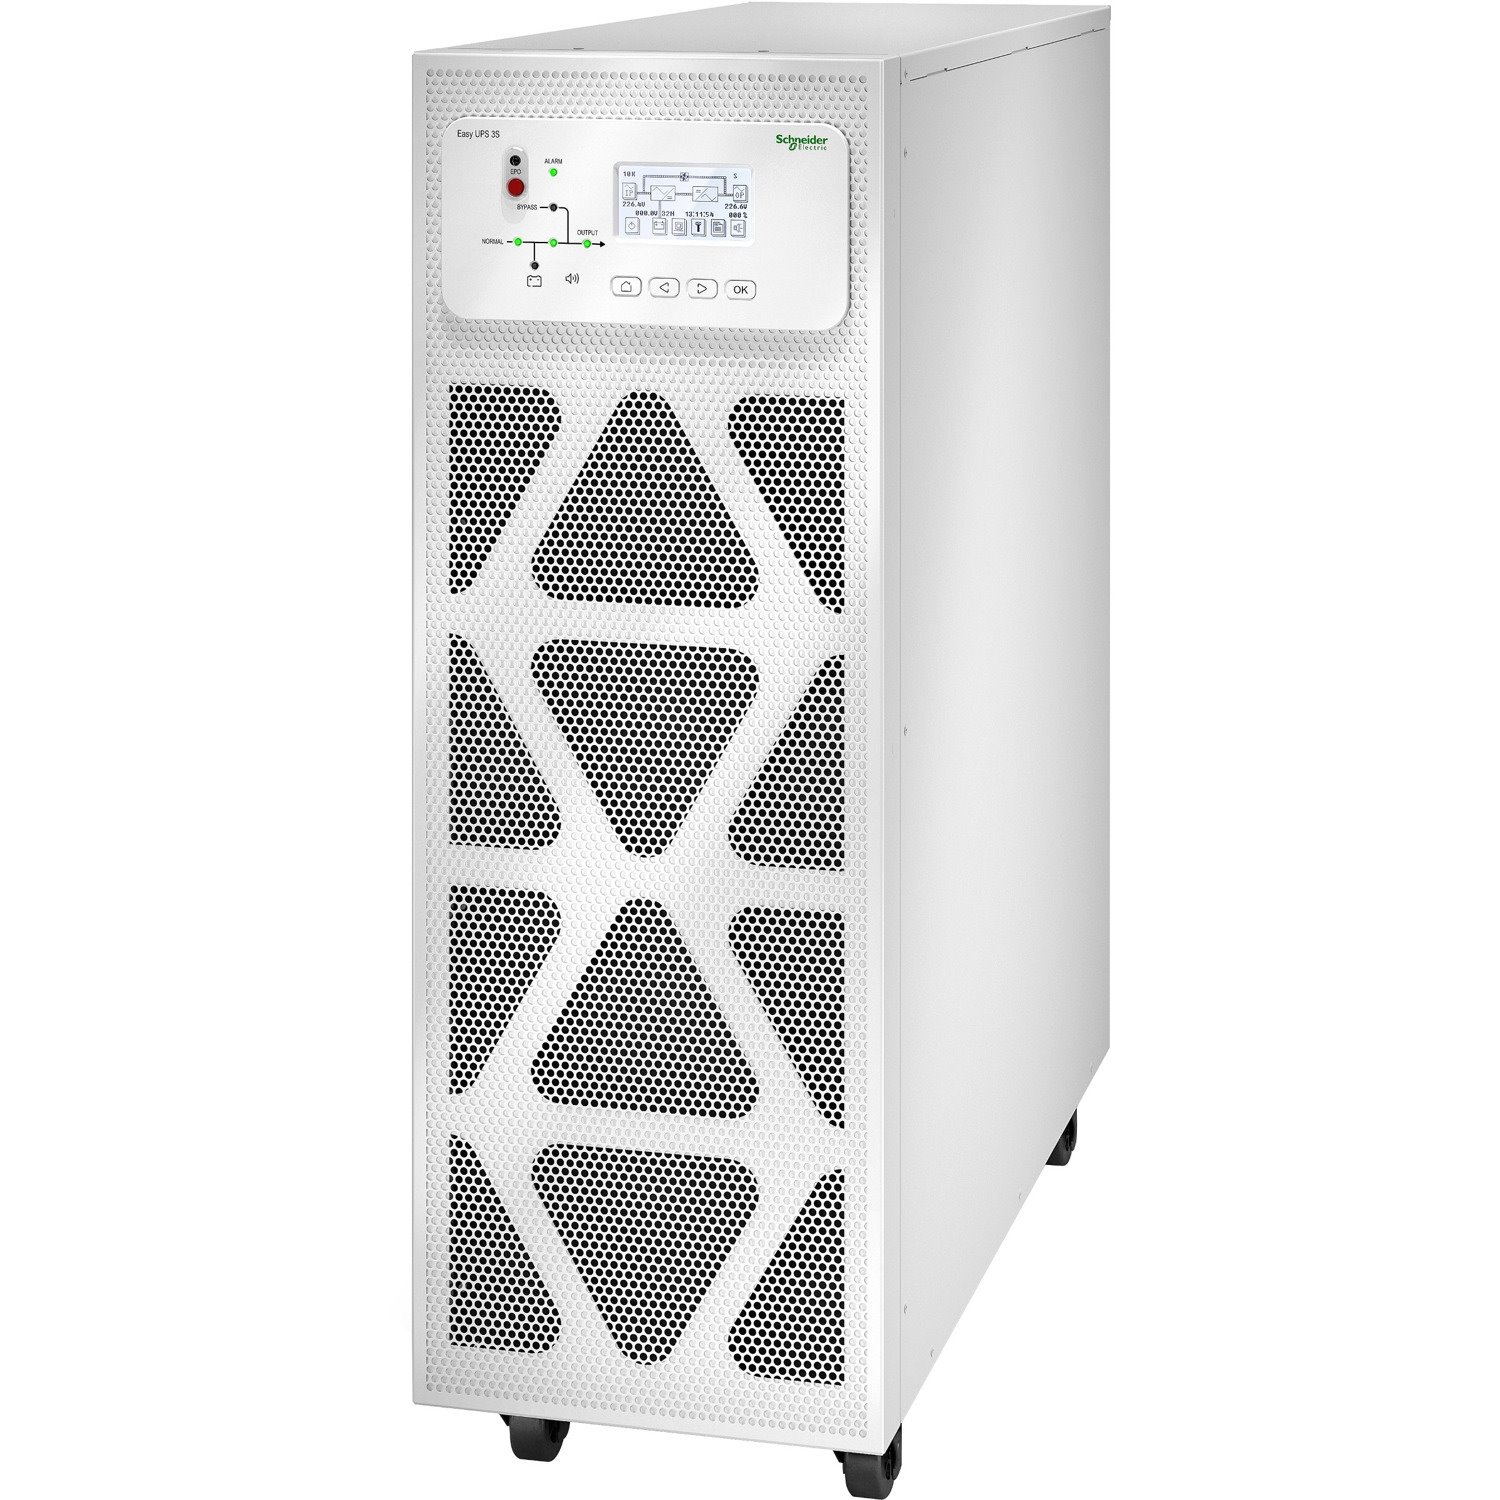 APC by Schneider Electric Easy UPS 3S Double Conversion Online UPS - 40 kVA - Three Phase